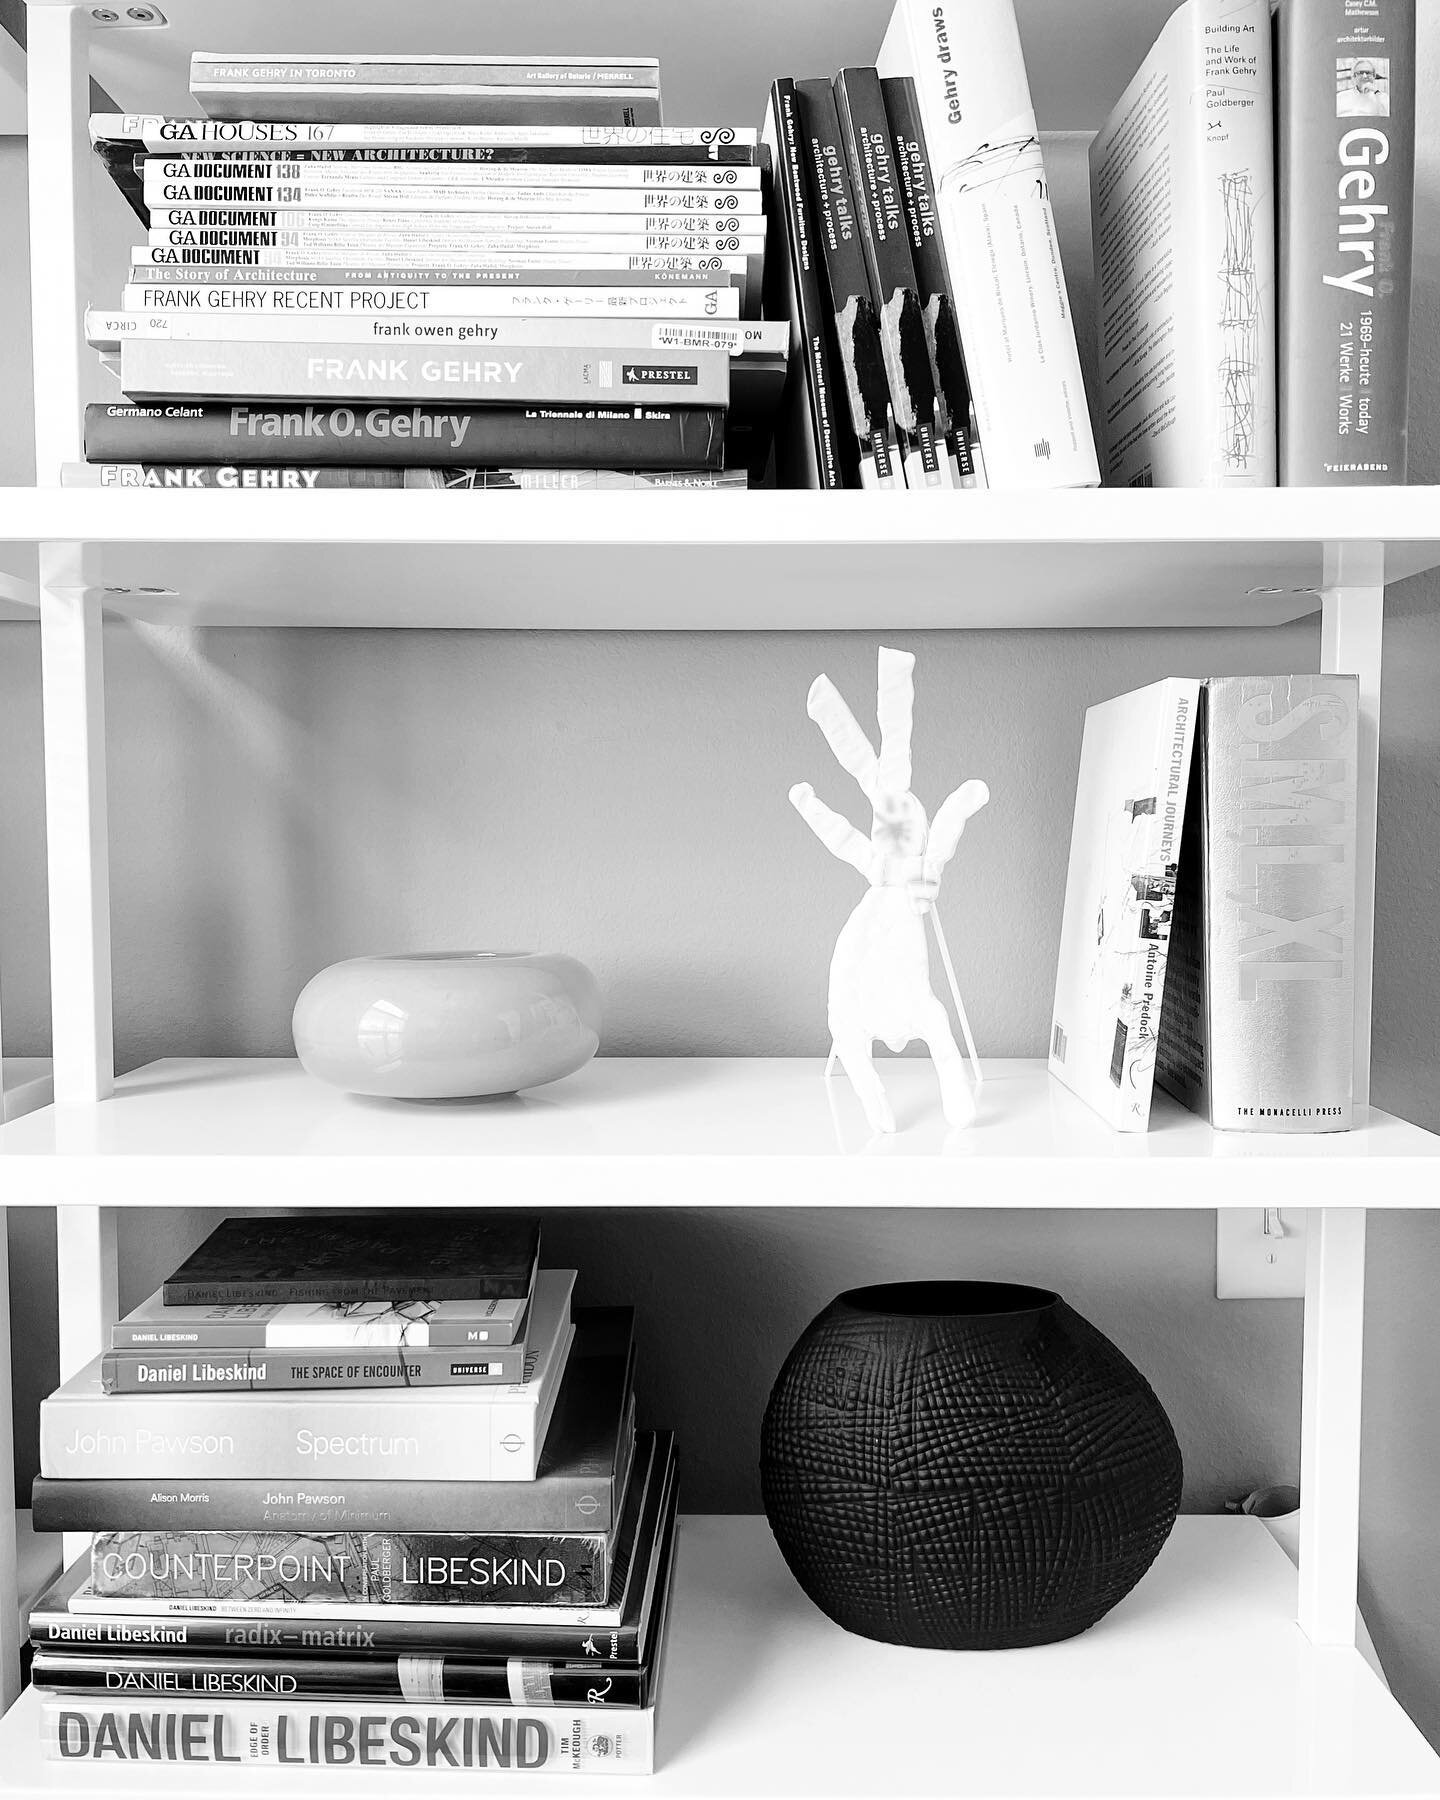 Reminiscing about my favorite architecture and design bookstores today! Lisacagestudio.com
@stoutbooks @hennesseyingalls @arcanabooks @strandbookstore 

Bunny sculpture by my 8 year old. It&rsquo;s a replica of a bunny from @nap_loungewear ❤️